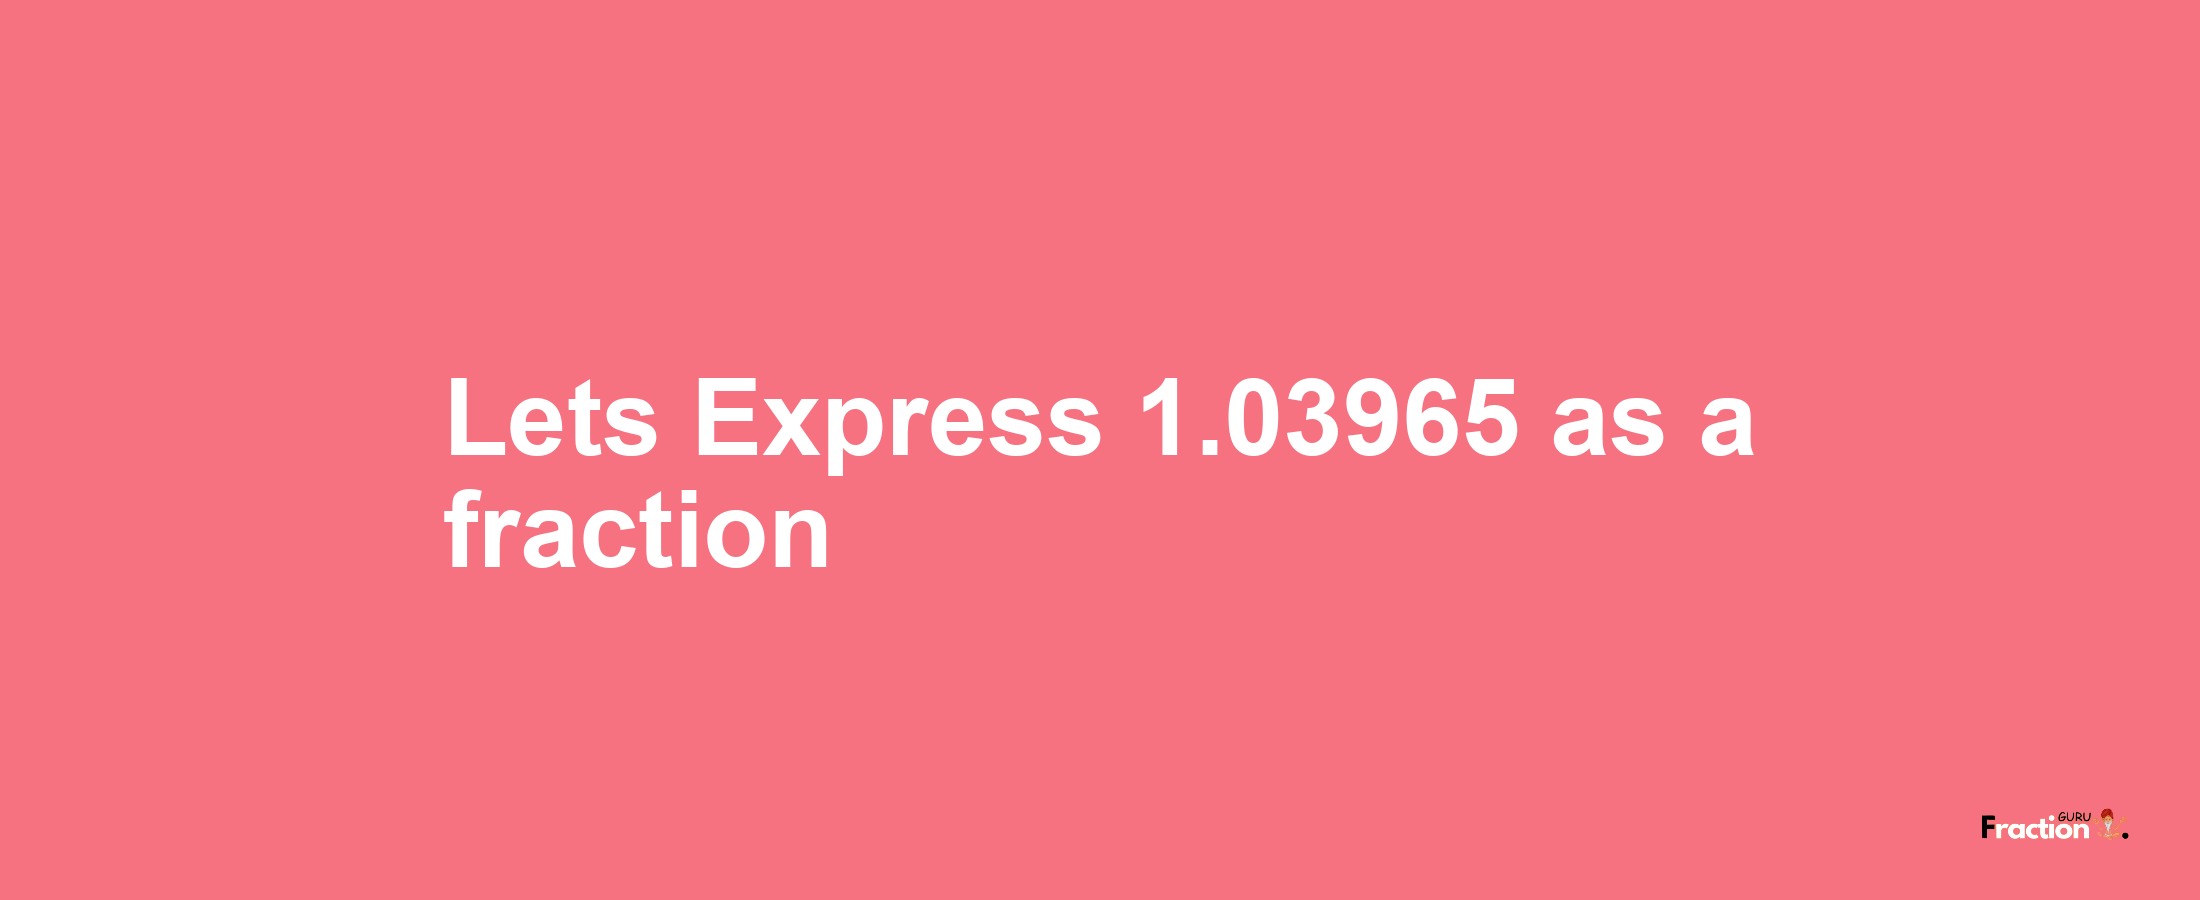 Lets Express 1.03965 as afraction